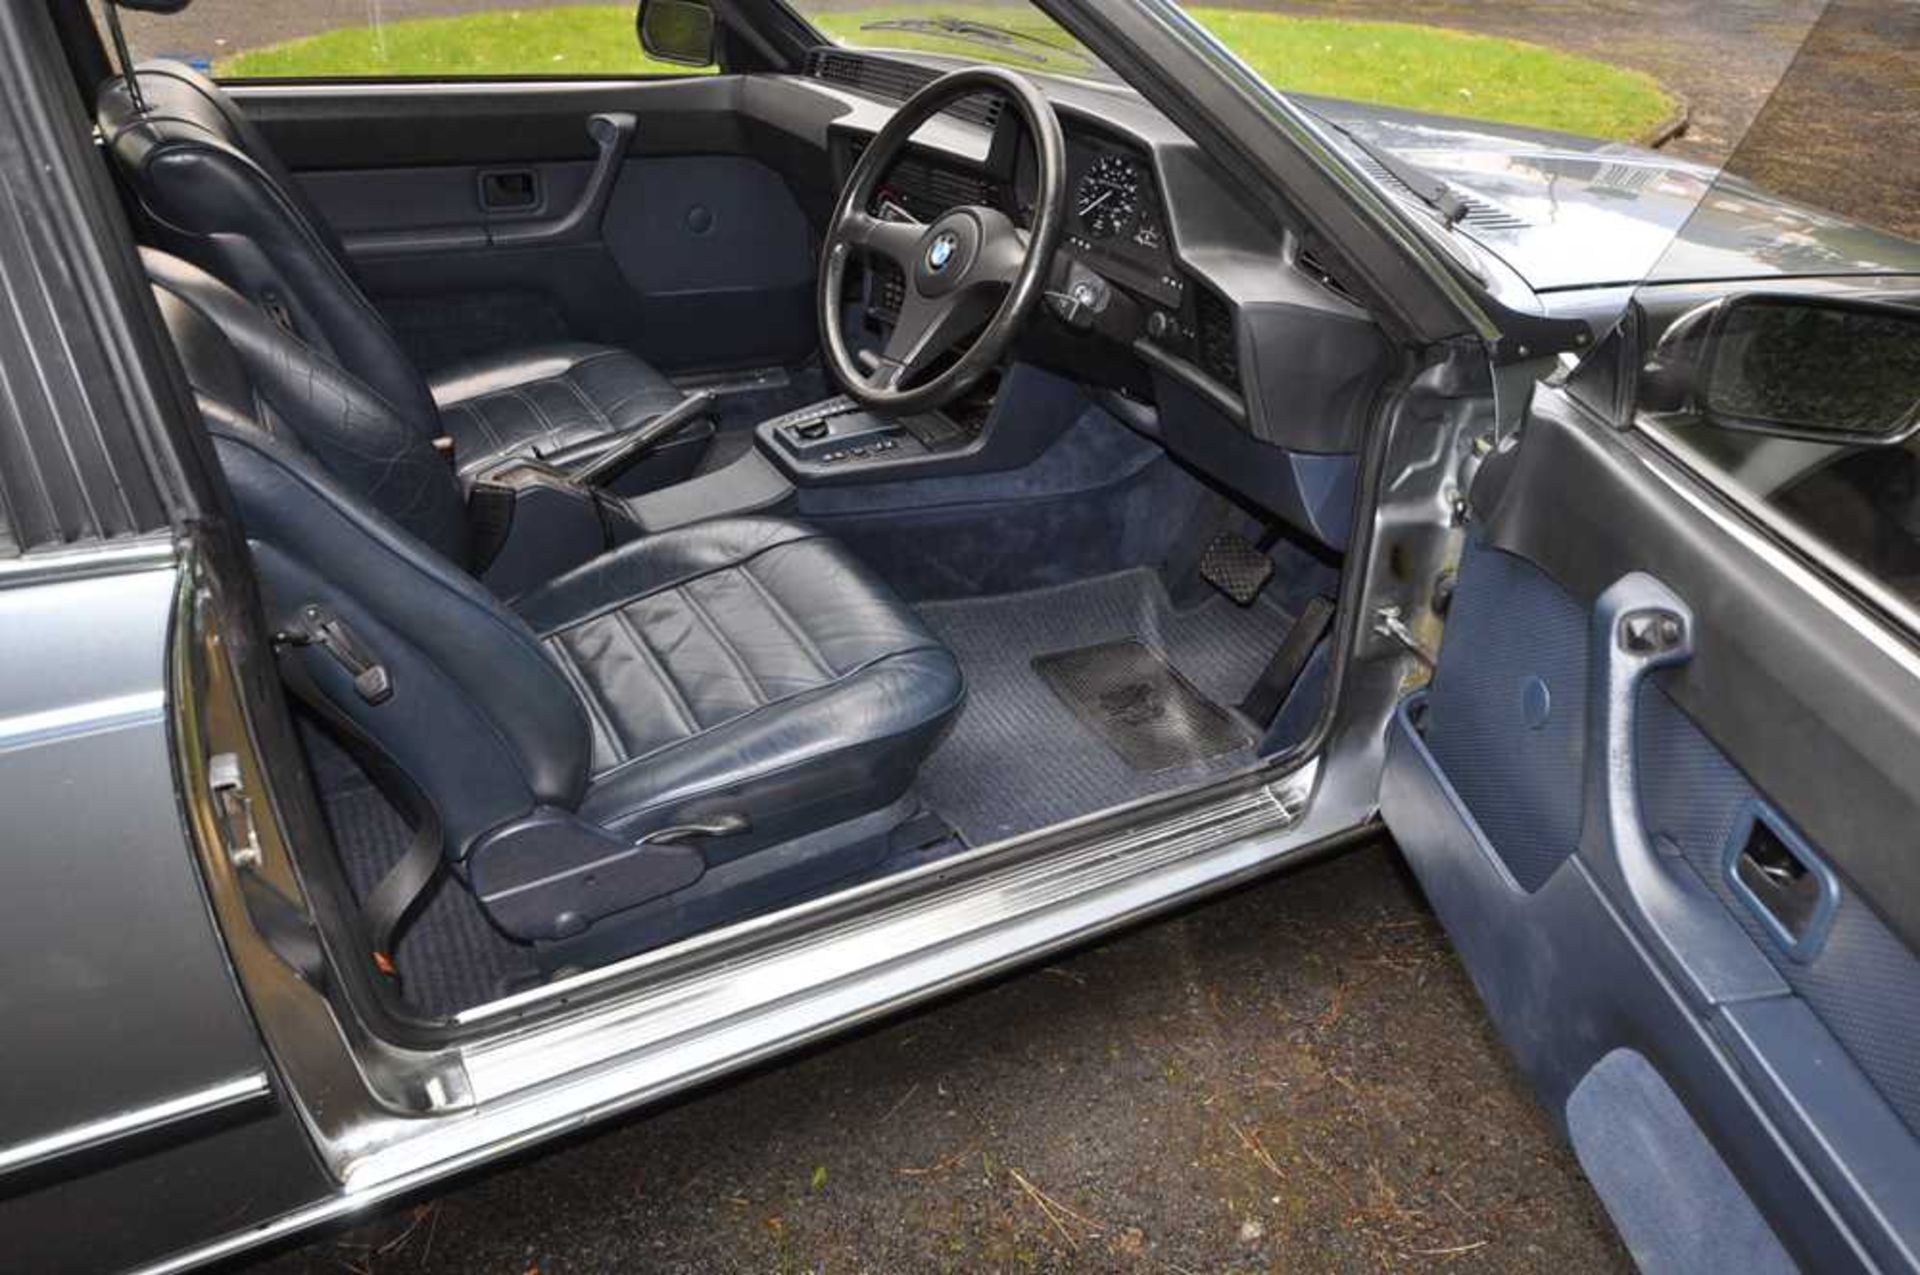 1985 BMW 635CSi Only 54,000 miles and One Owner From New - Image 23 of 43